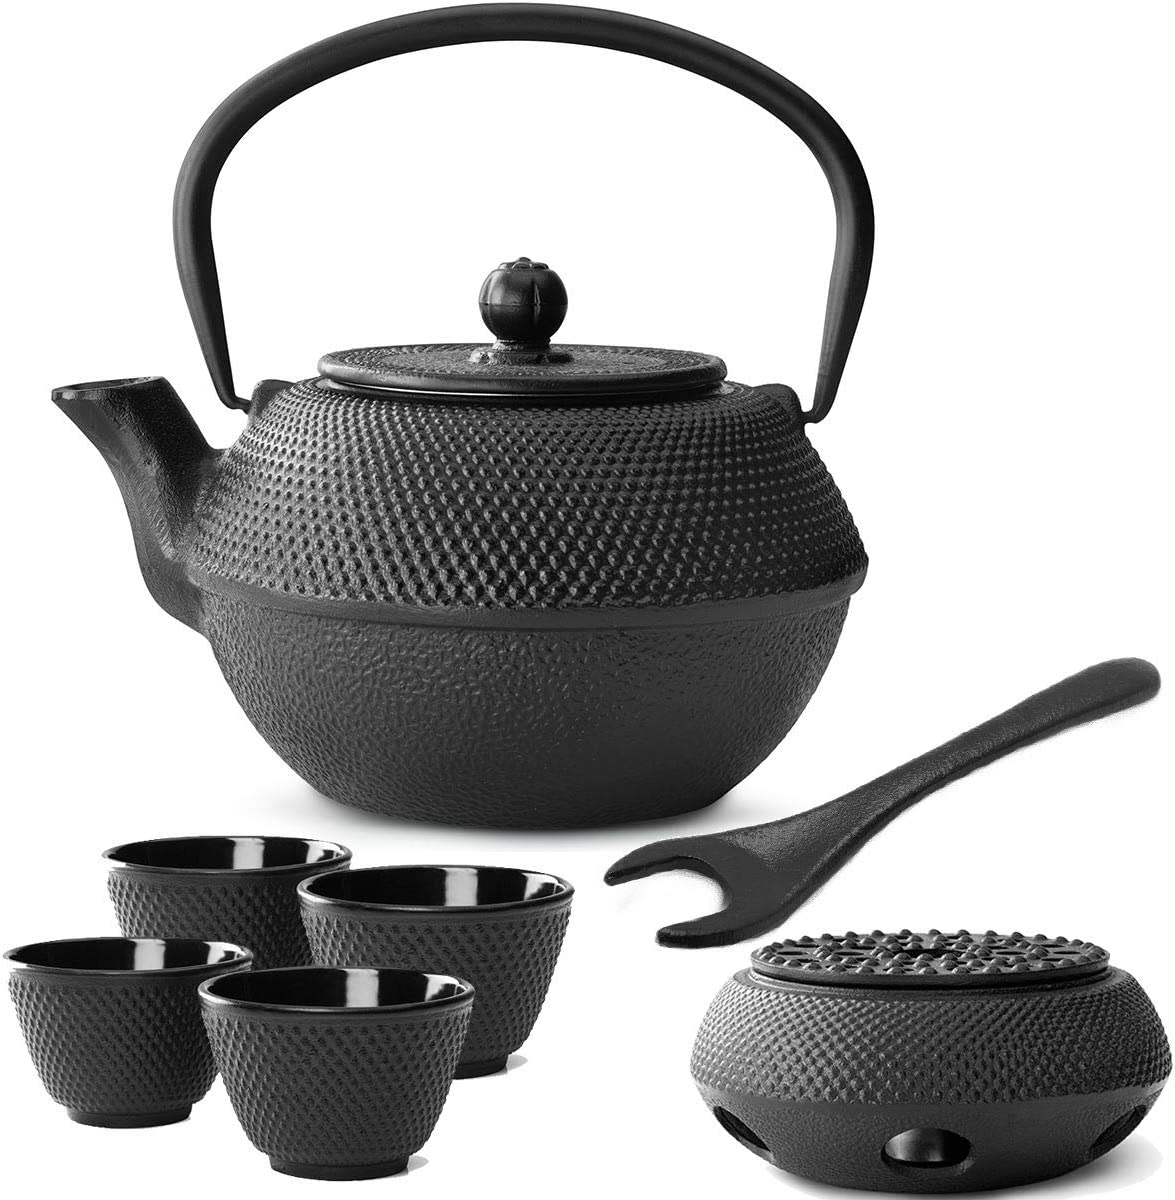 Bredemeijer Teapot Asian Cast Iron Set 1.1 Litres - Black Cast Iron Can with Strainer Insert for Loose Tea & 4 Tea Cups (Cups) & Warmer & Lid Lifter